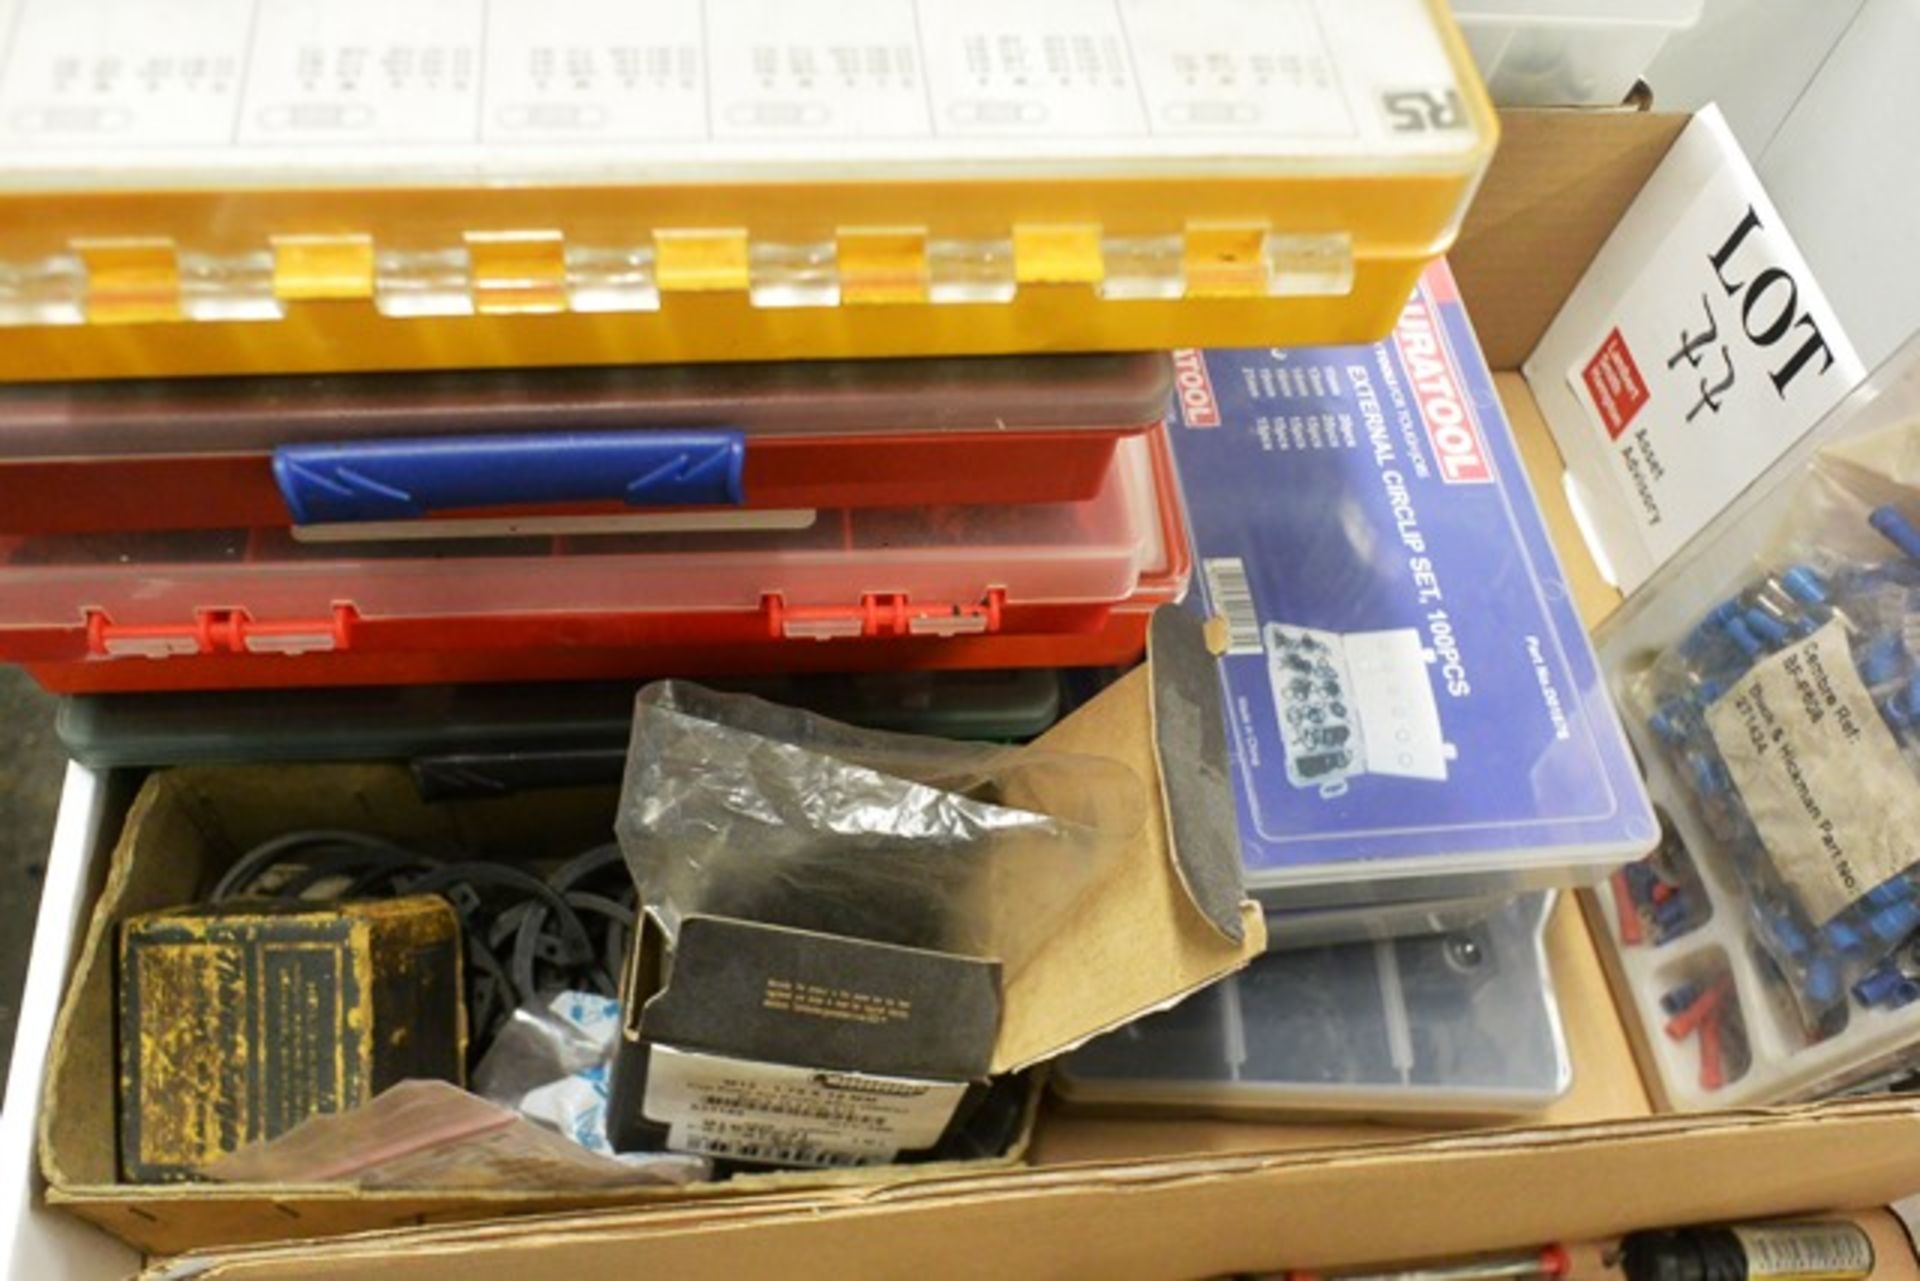 Contents of one box to include springs, heat shrink, crimp terminals, circlips (Please note, This